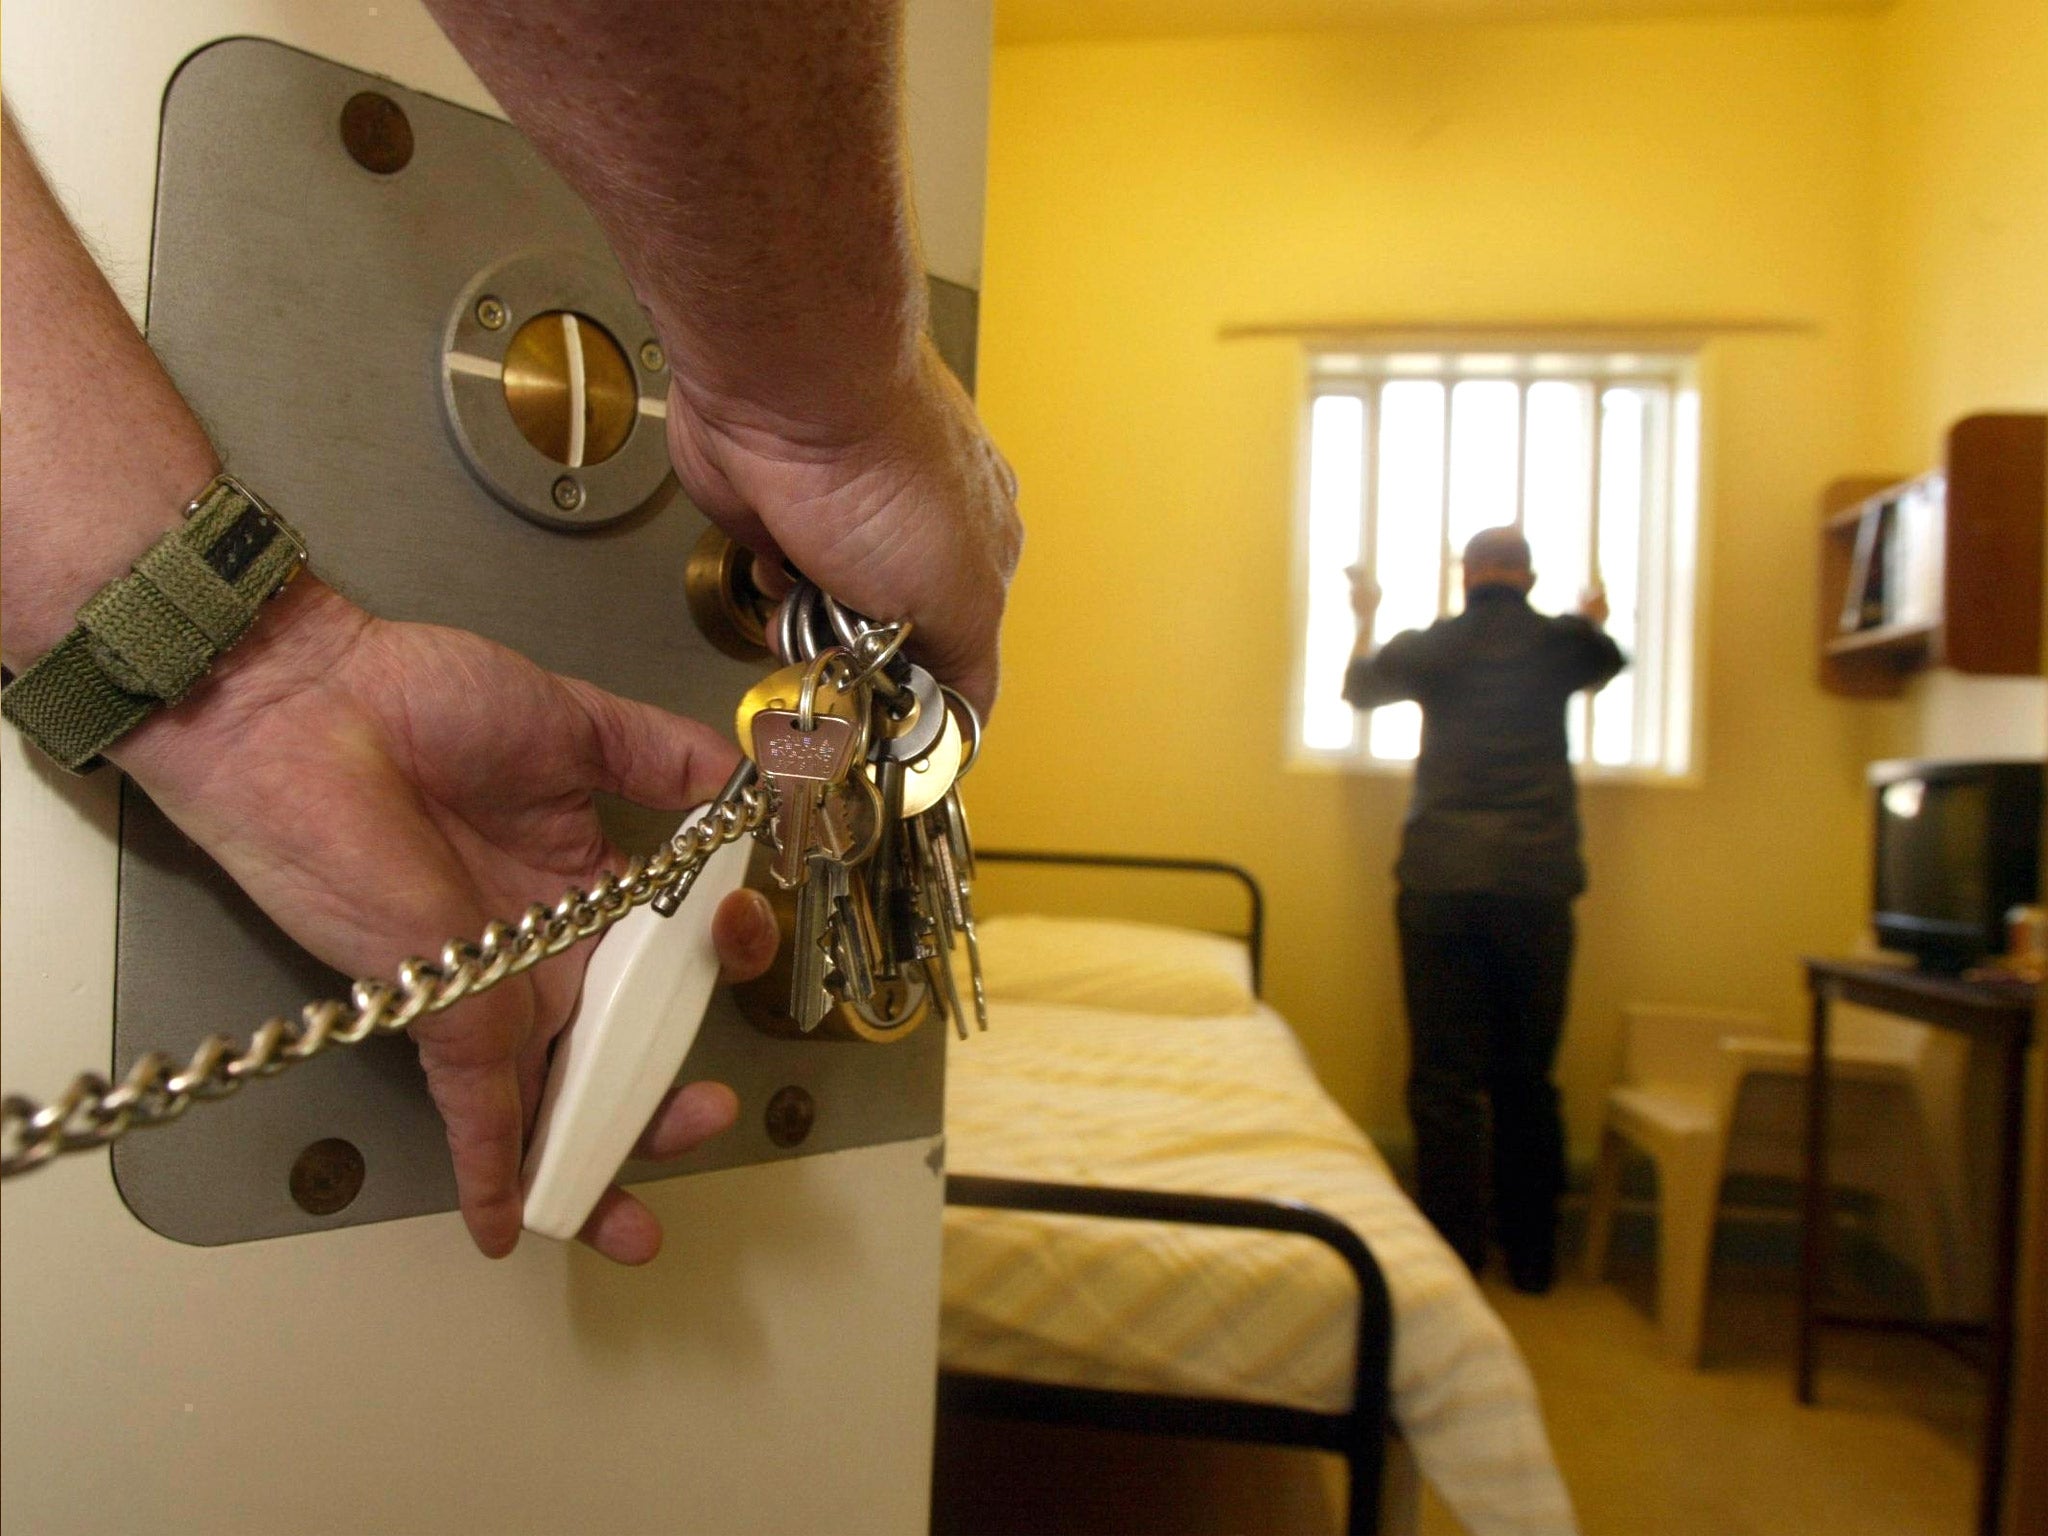 The move is designed to help teenage criminals break the 'pernicious cycle' of reoffending